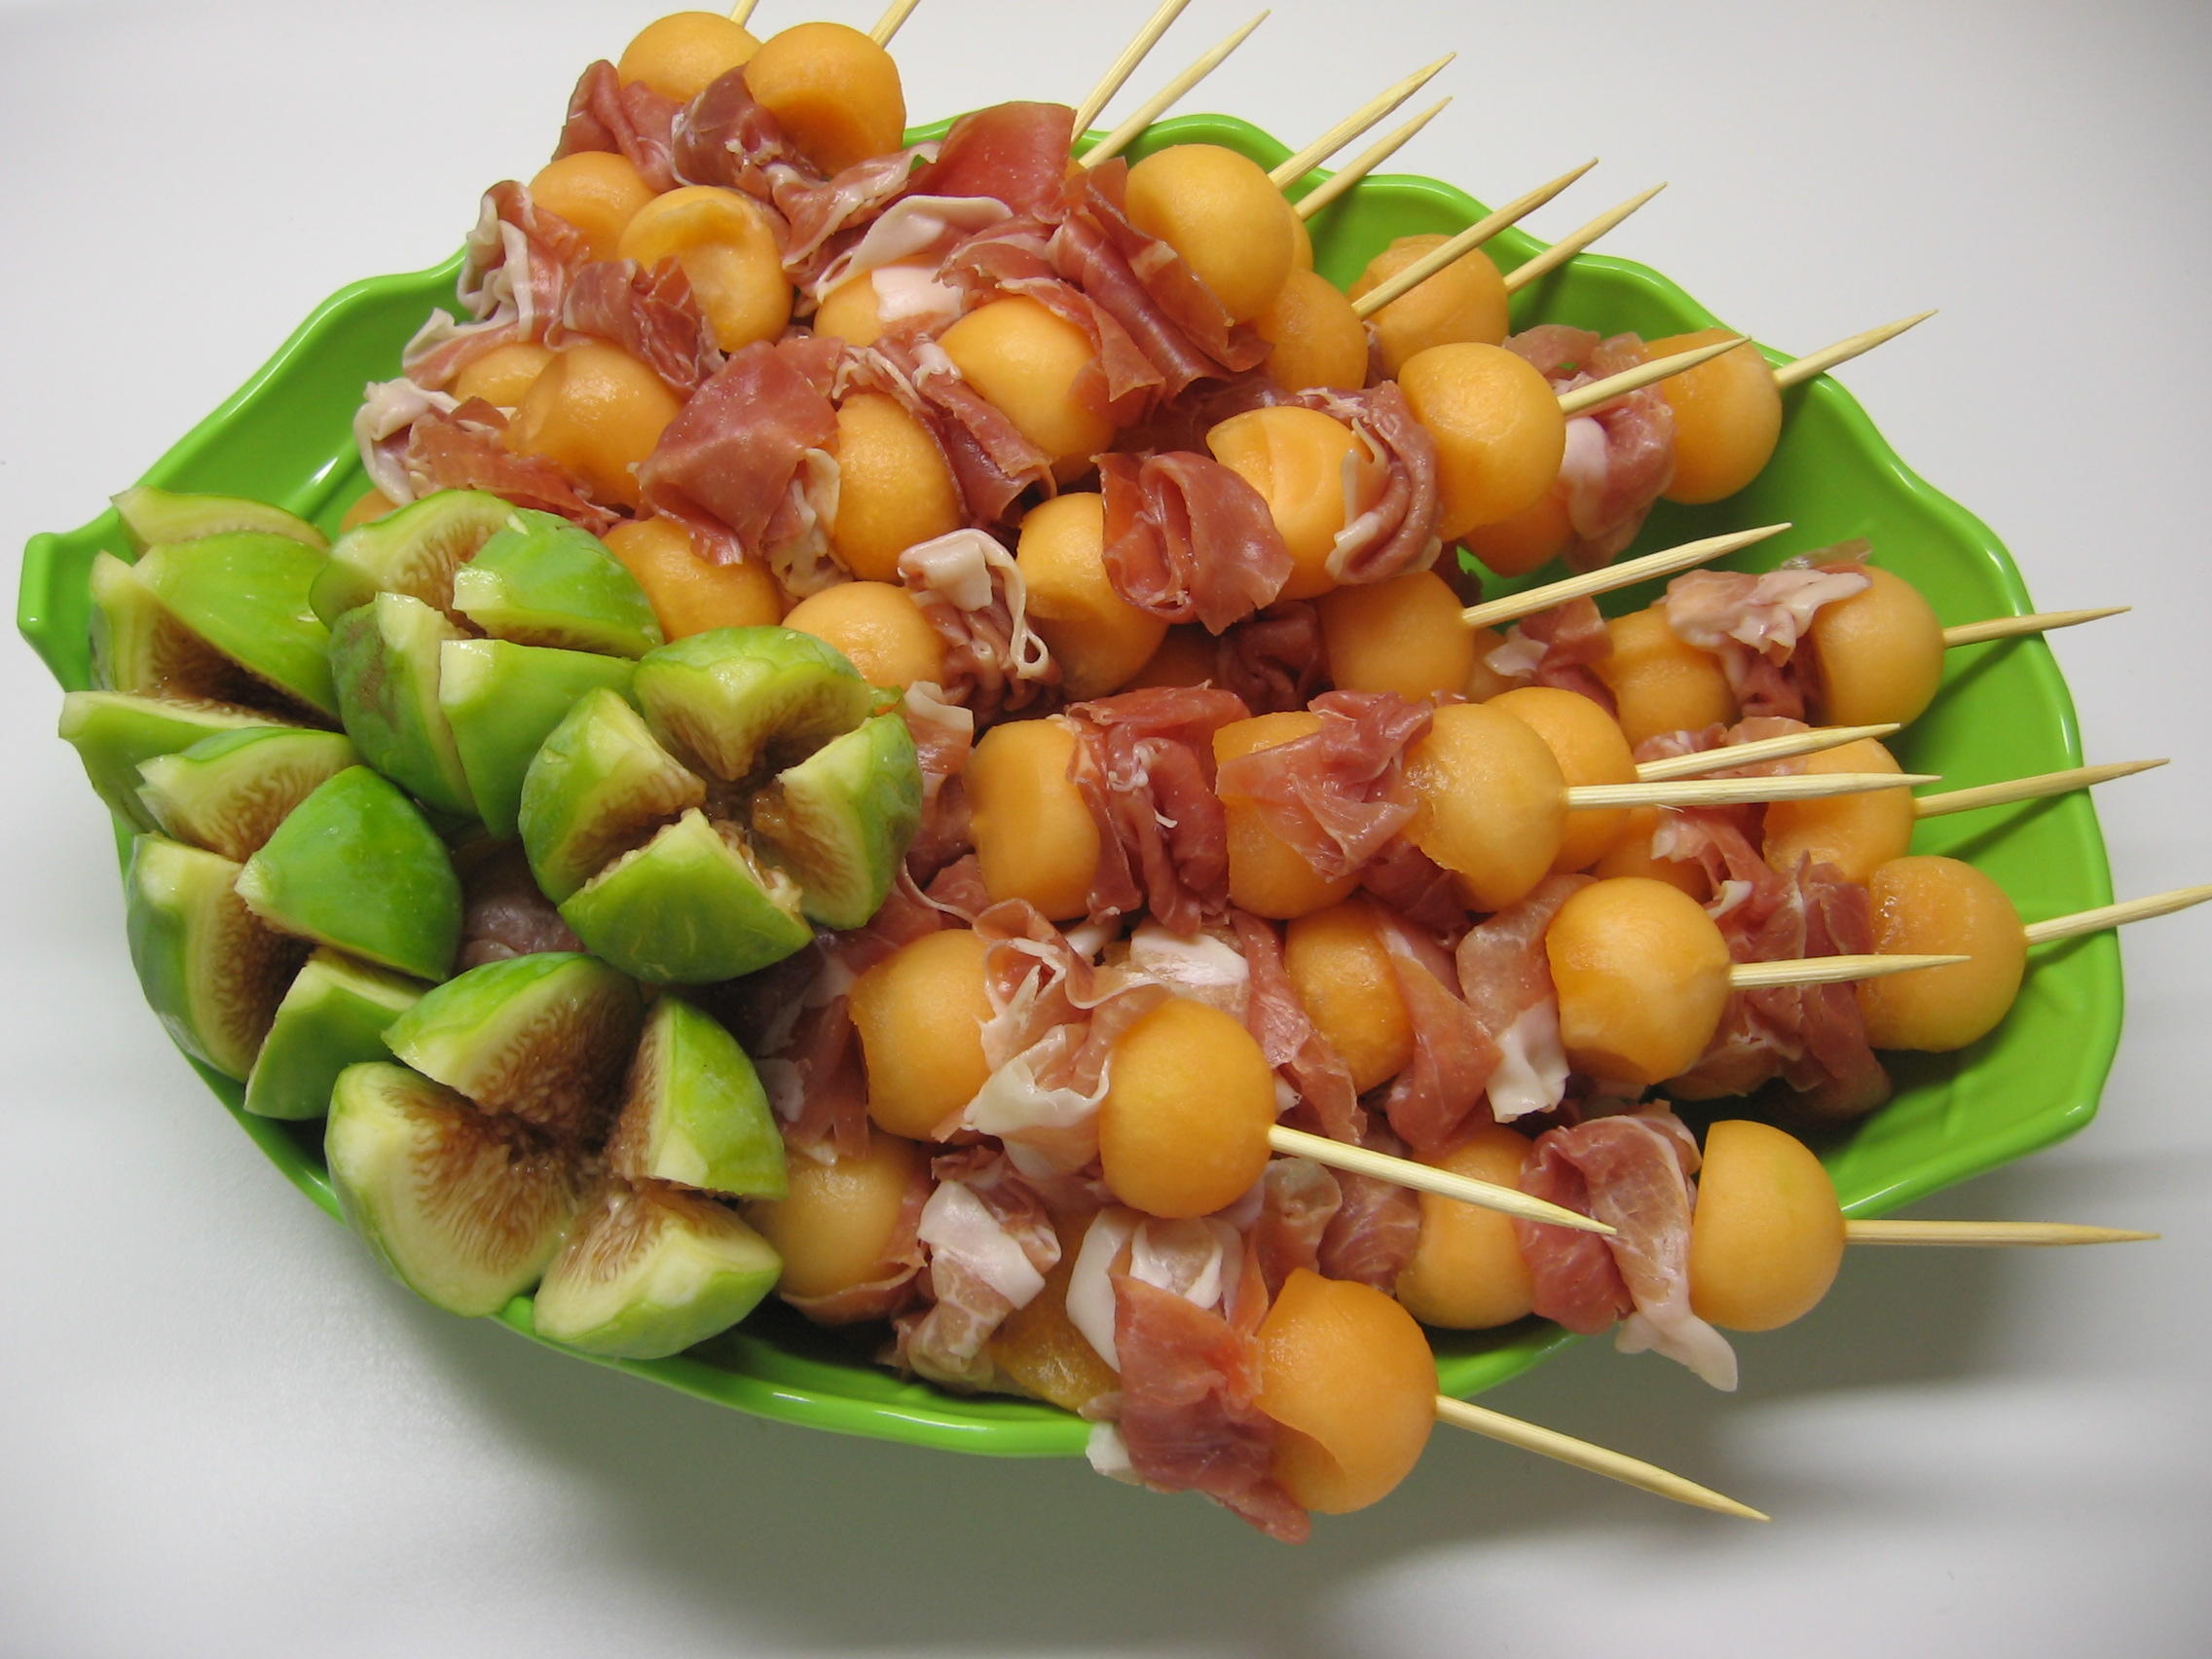 Melon Skewers with Ham and Figs